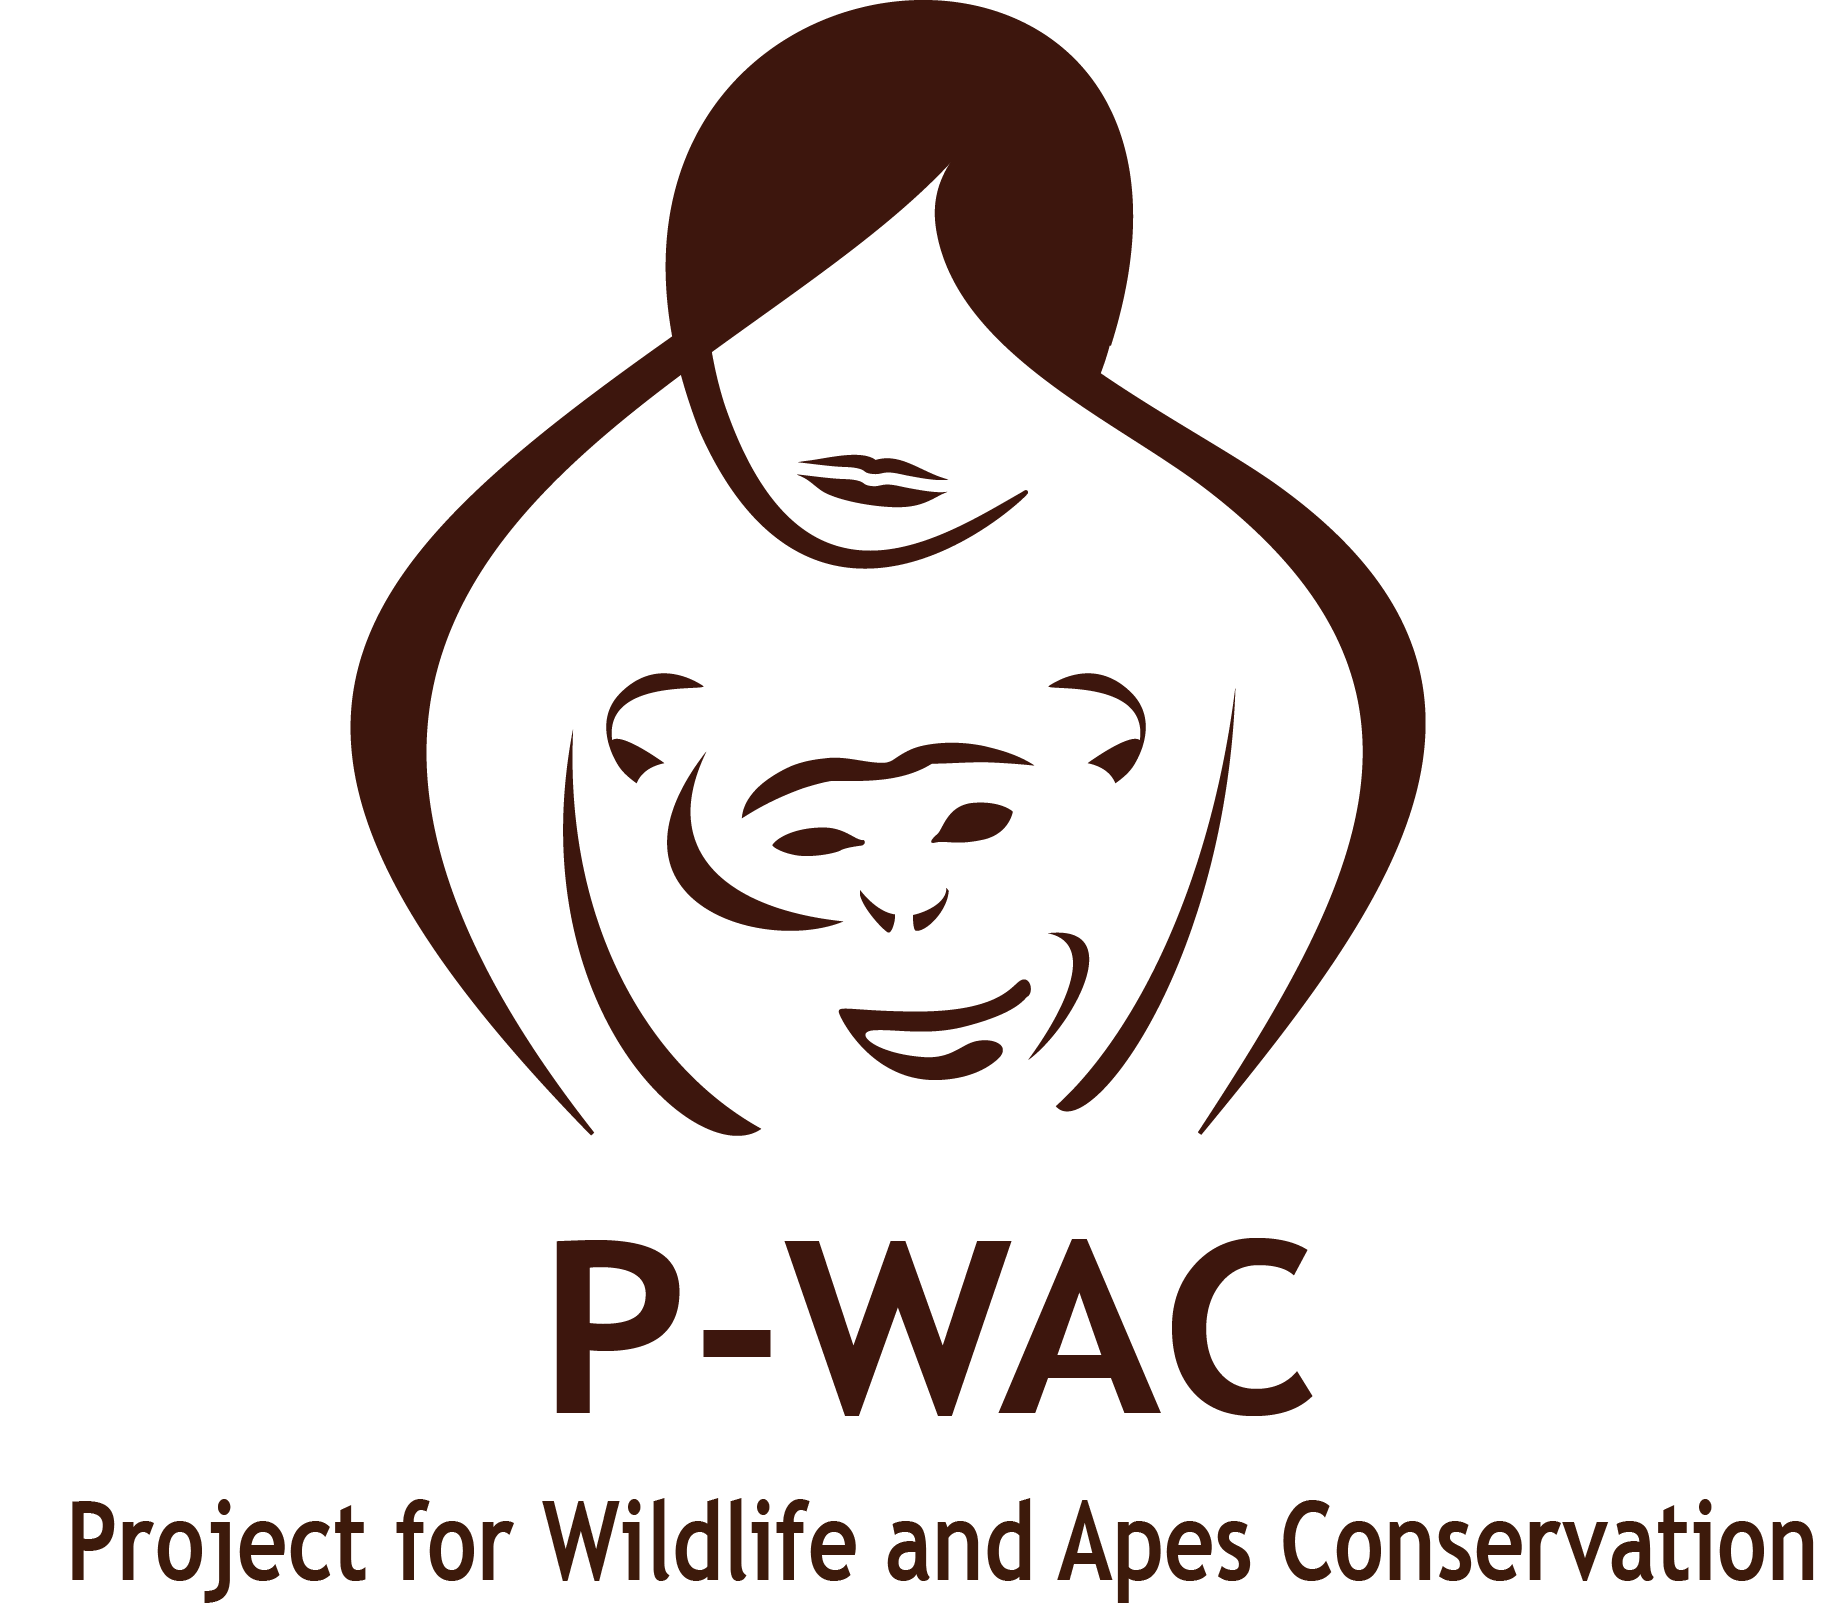 WAC Logo - What is the meaning of the P-WAC logo? - P-WAC